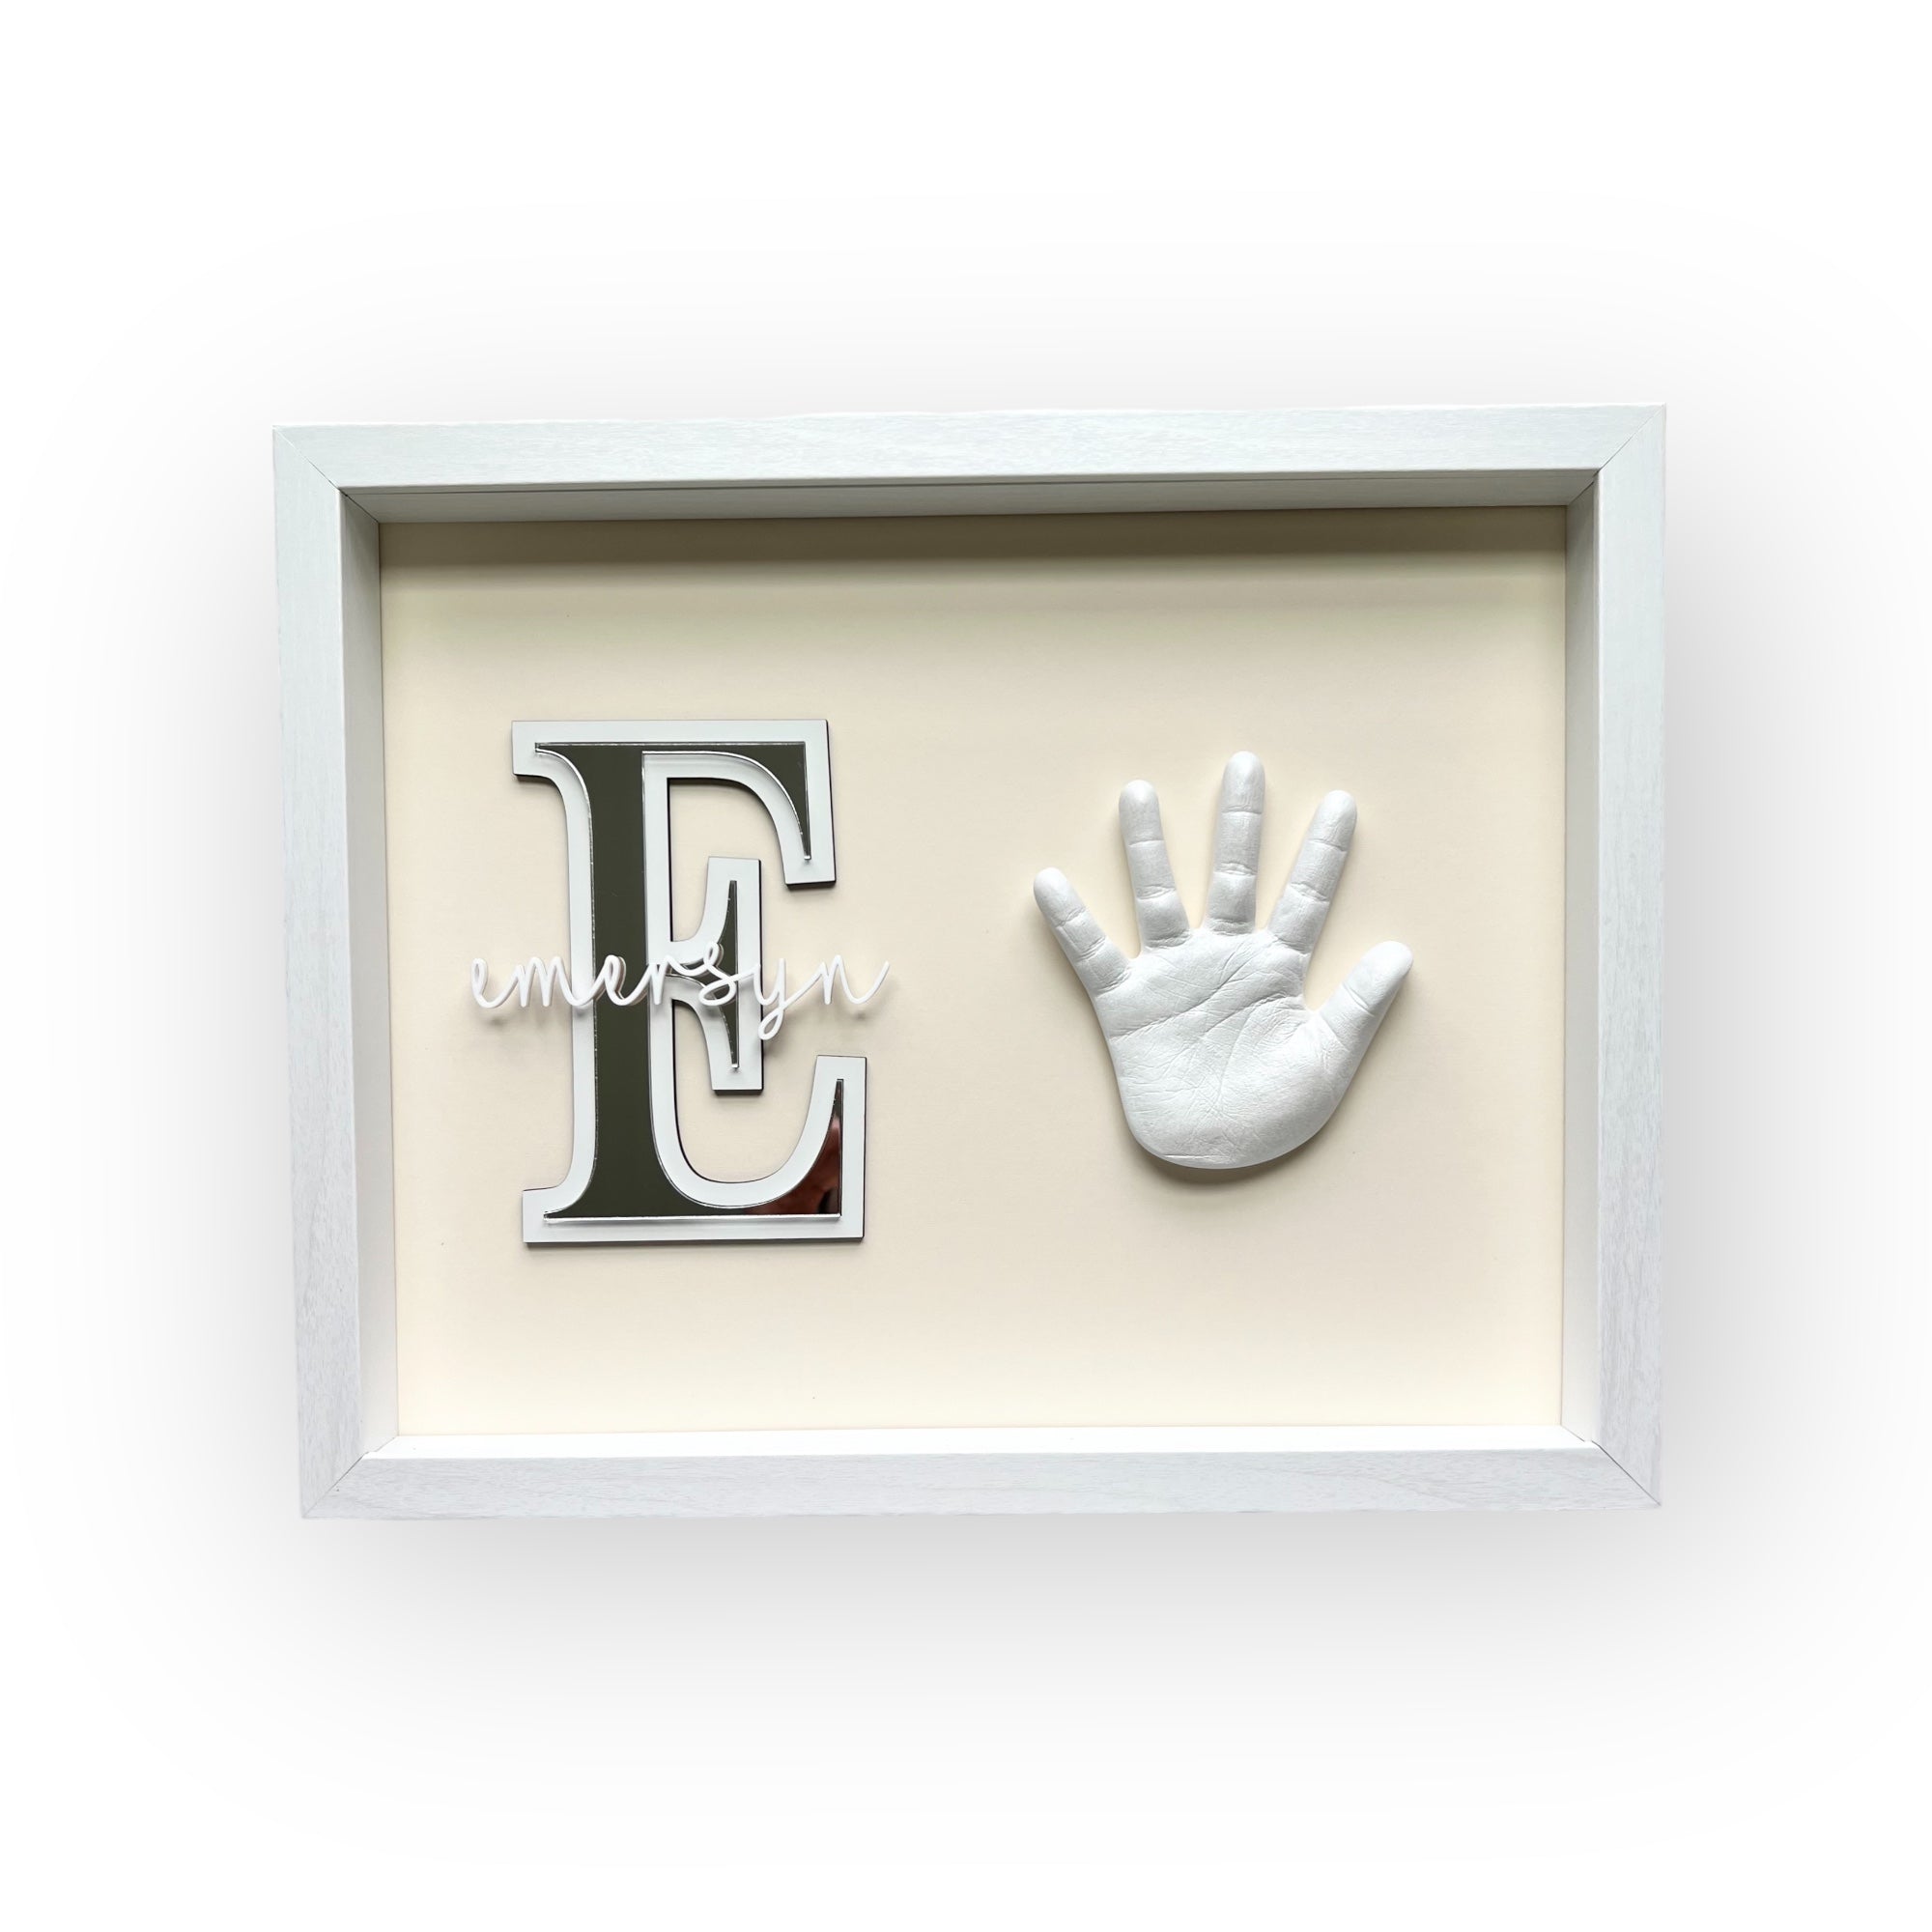 Framed casting kit with the name for baby 0-12 months